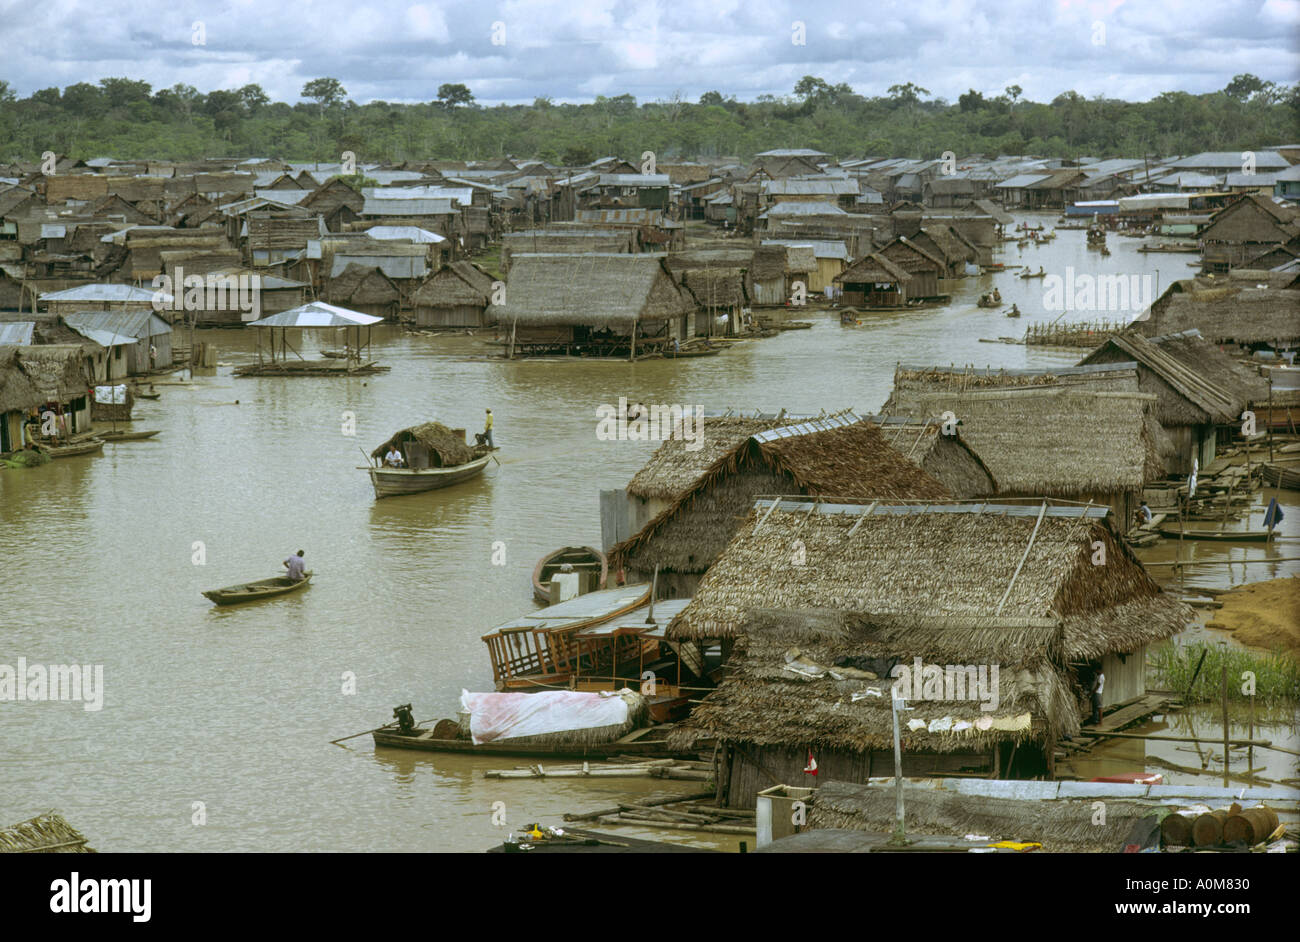 Peru1970 floating town of Belen Iquitos amazon river Loreto department consisting wood and palm leaved huts on stilts and rafts Stock Photo